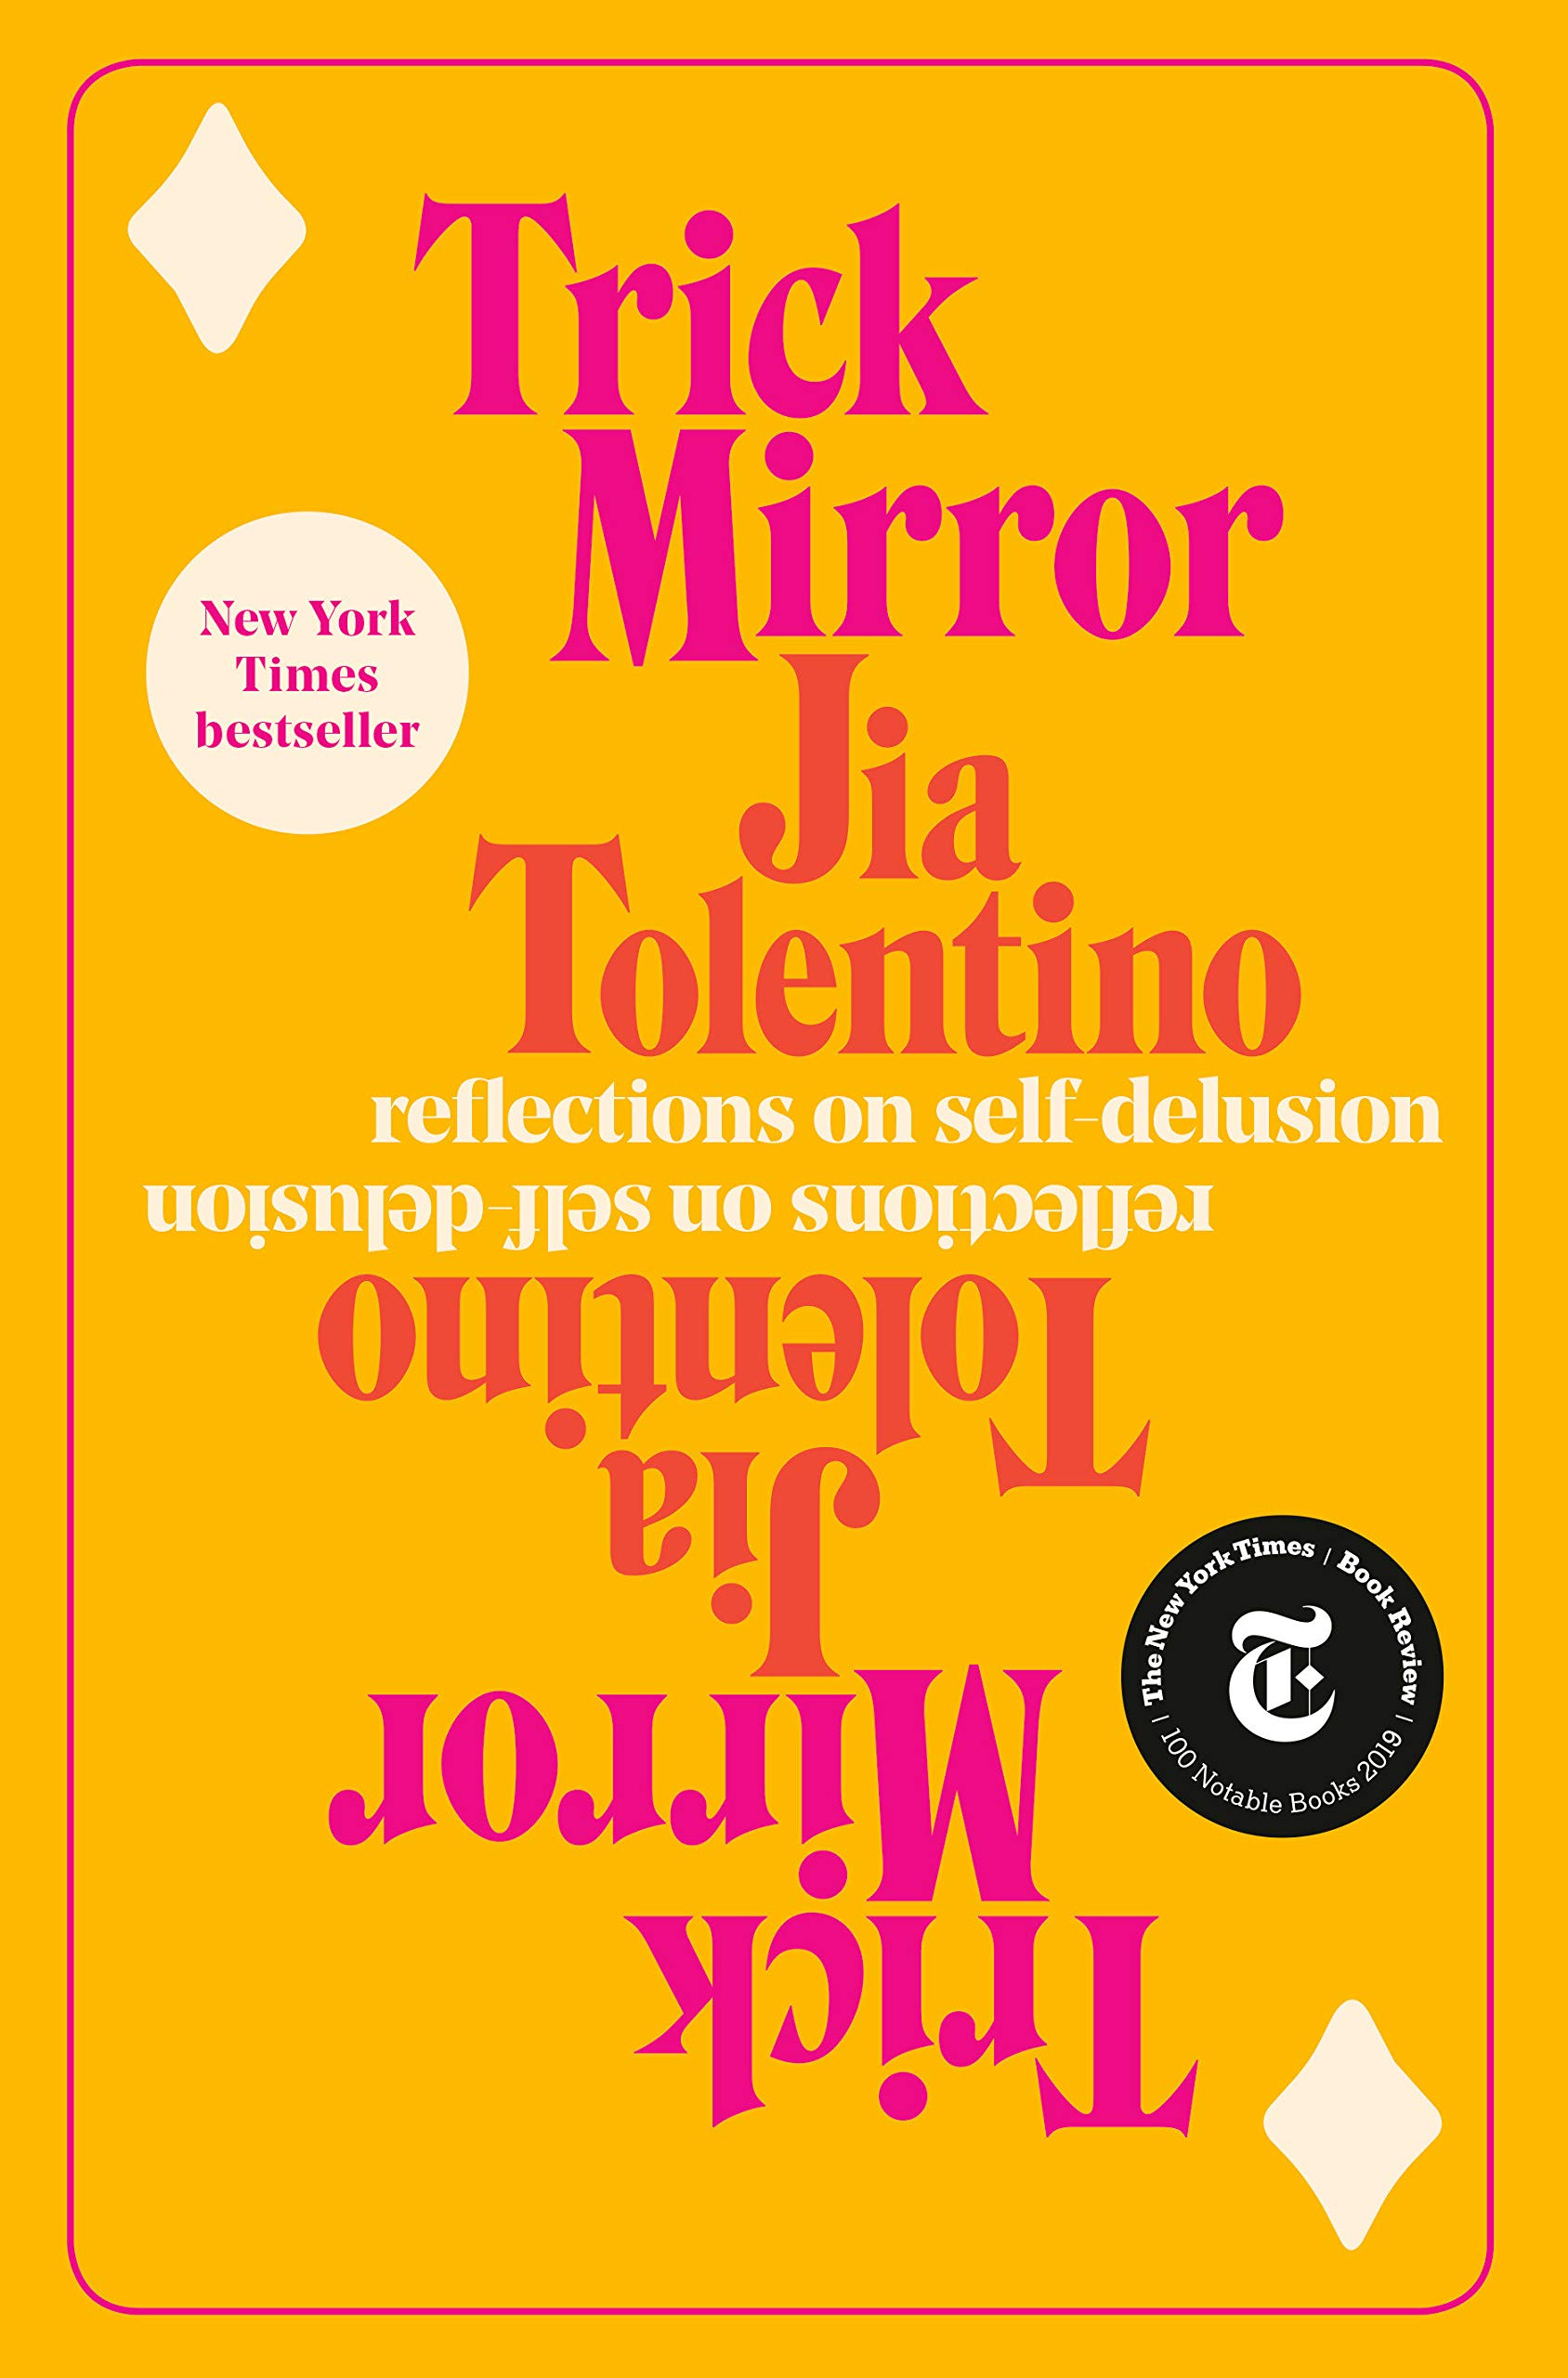 A graphic of the cover of Trick Mirror: Reflections on Self-Delusion by Jia Tolentino